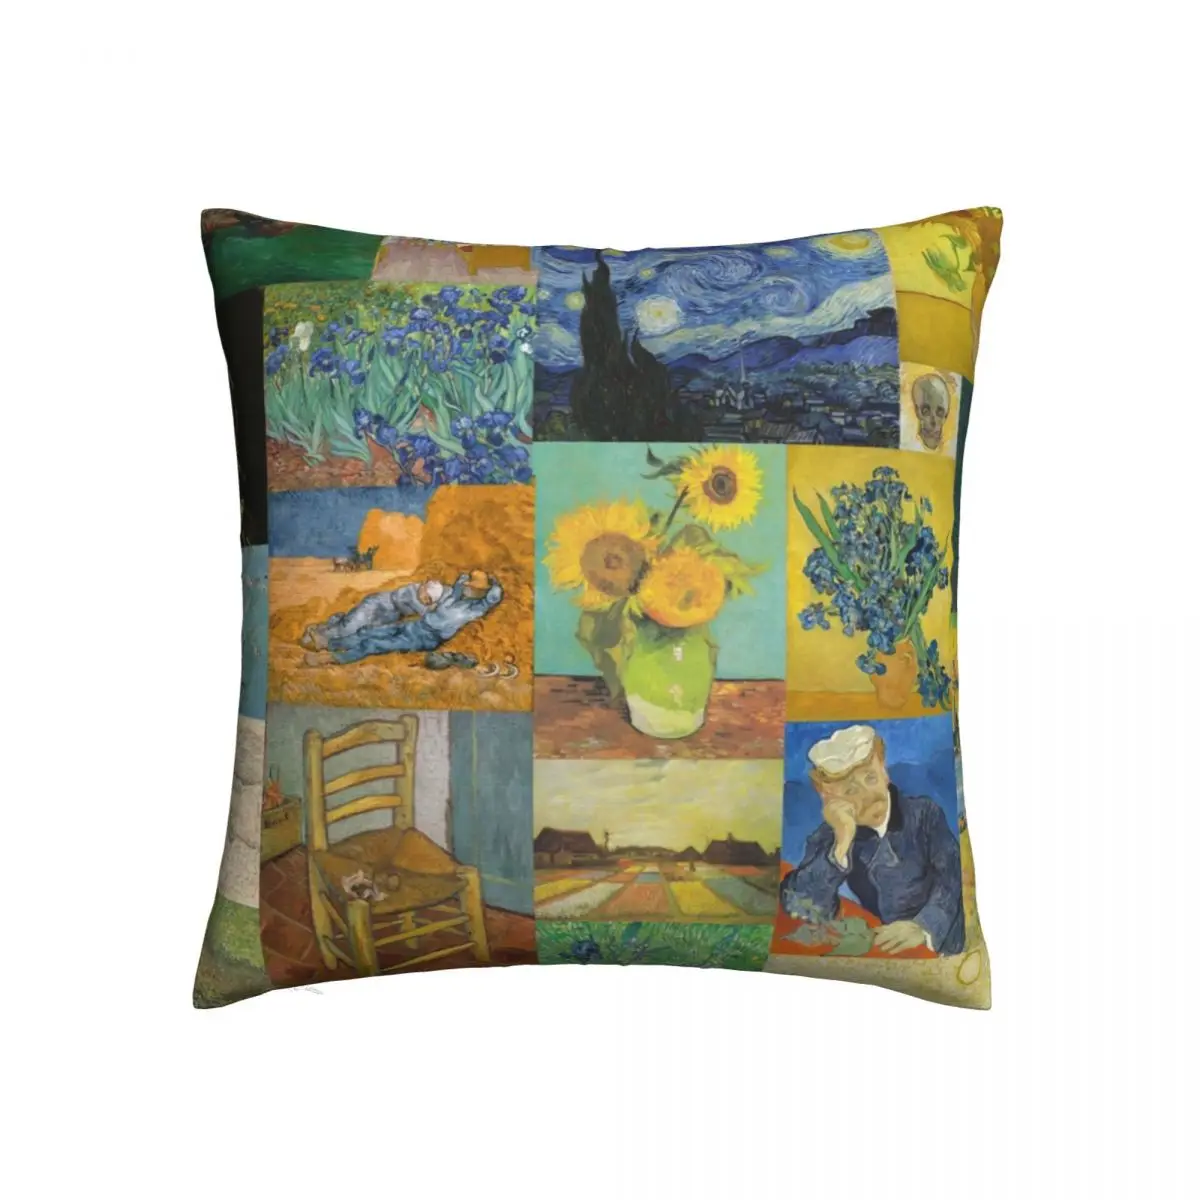 

Van Gogh Pillowcase Printed Polyester Cushion Cover Decorations starry night painter Pillow Case Cover Home Zippered 40*40cm